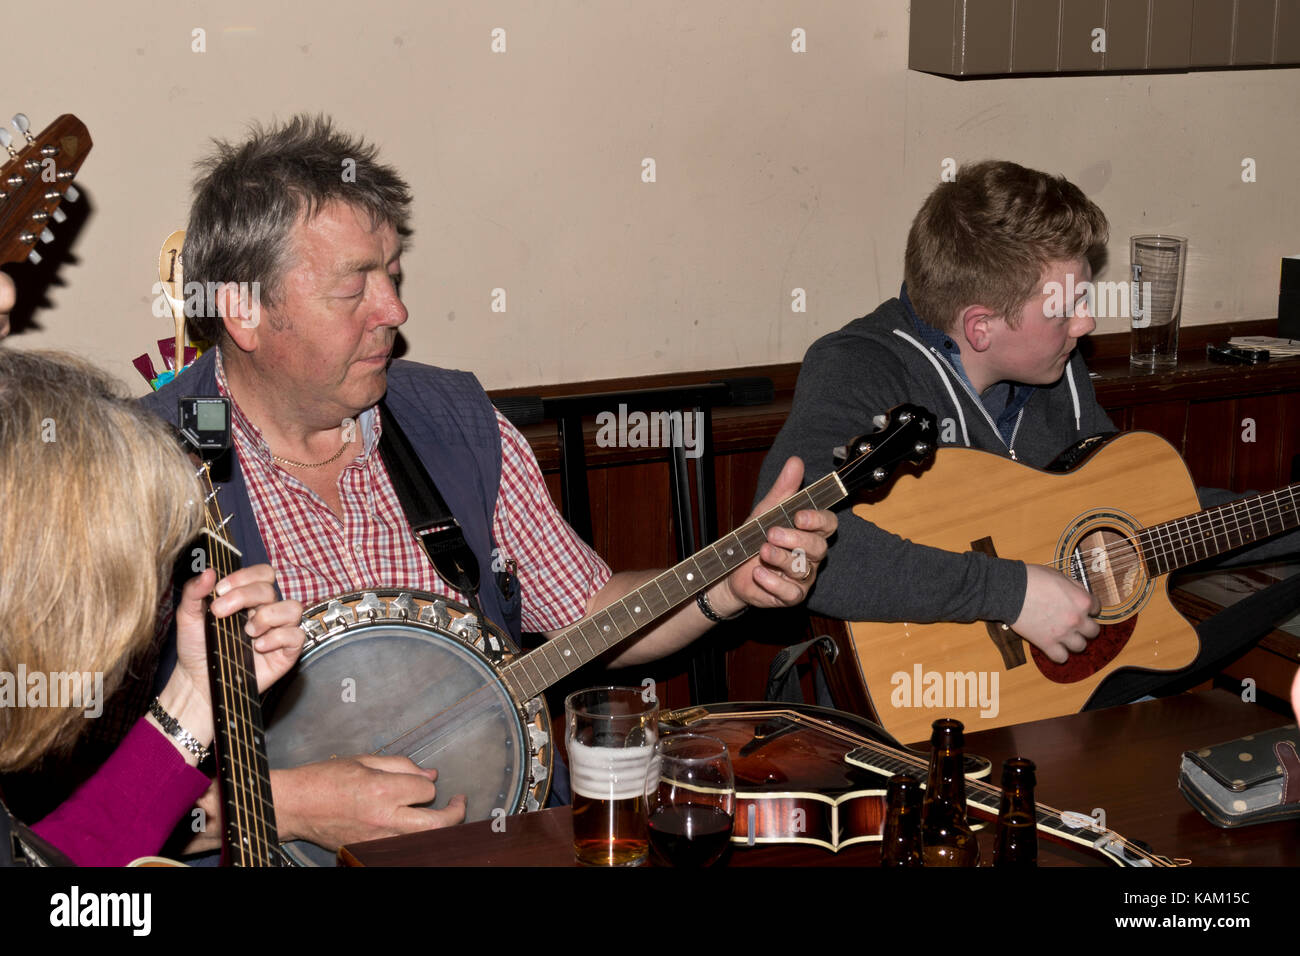 Playing traditional music in Orkney pub Stock Photo